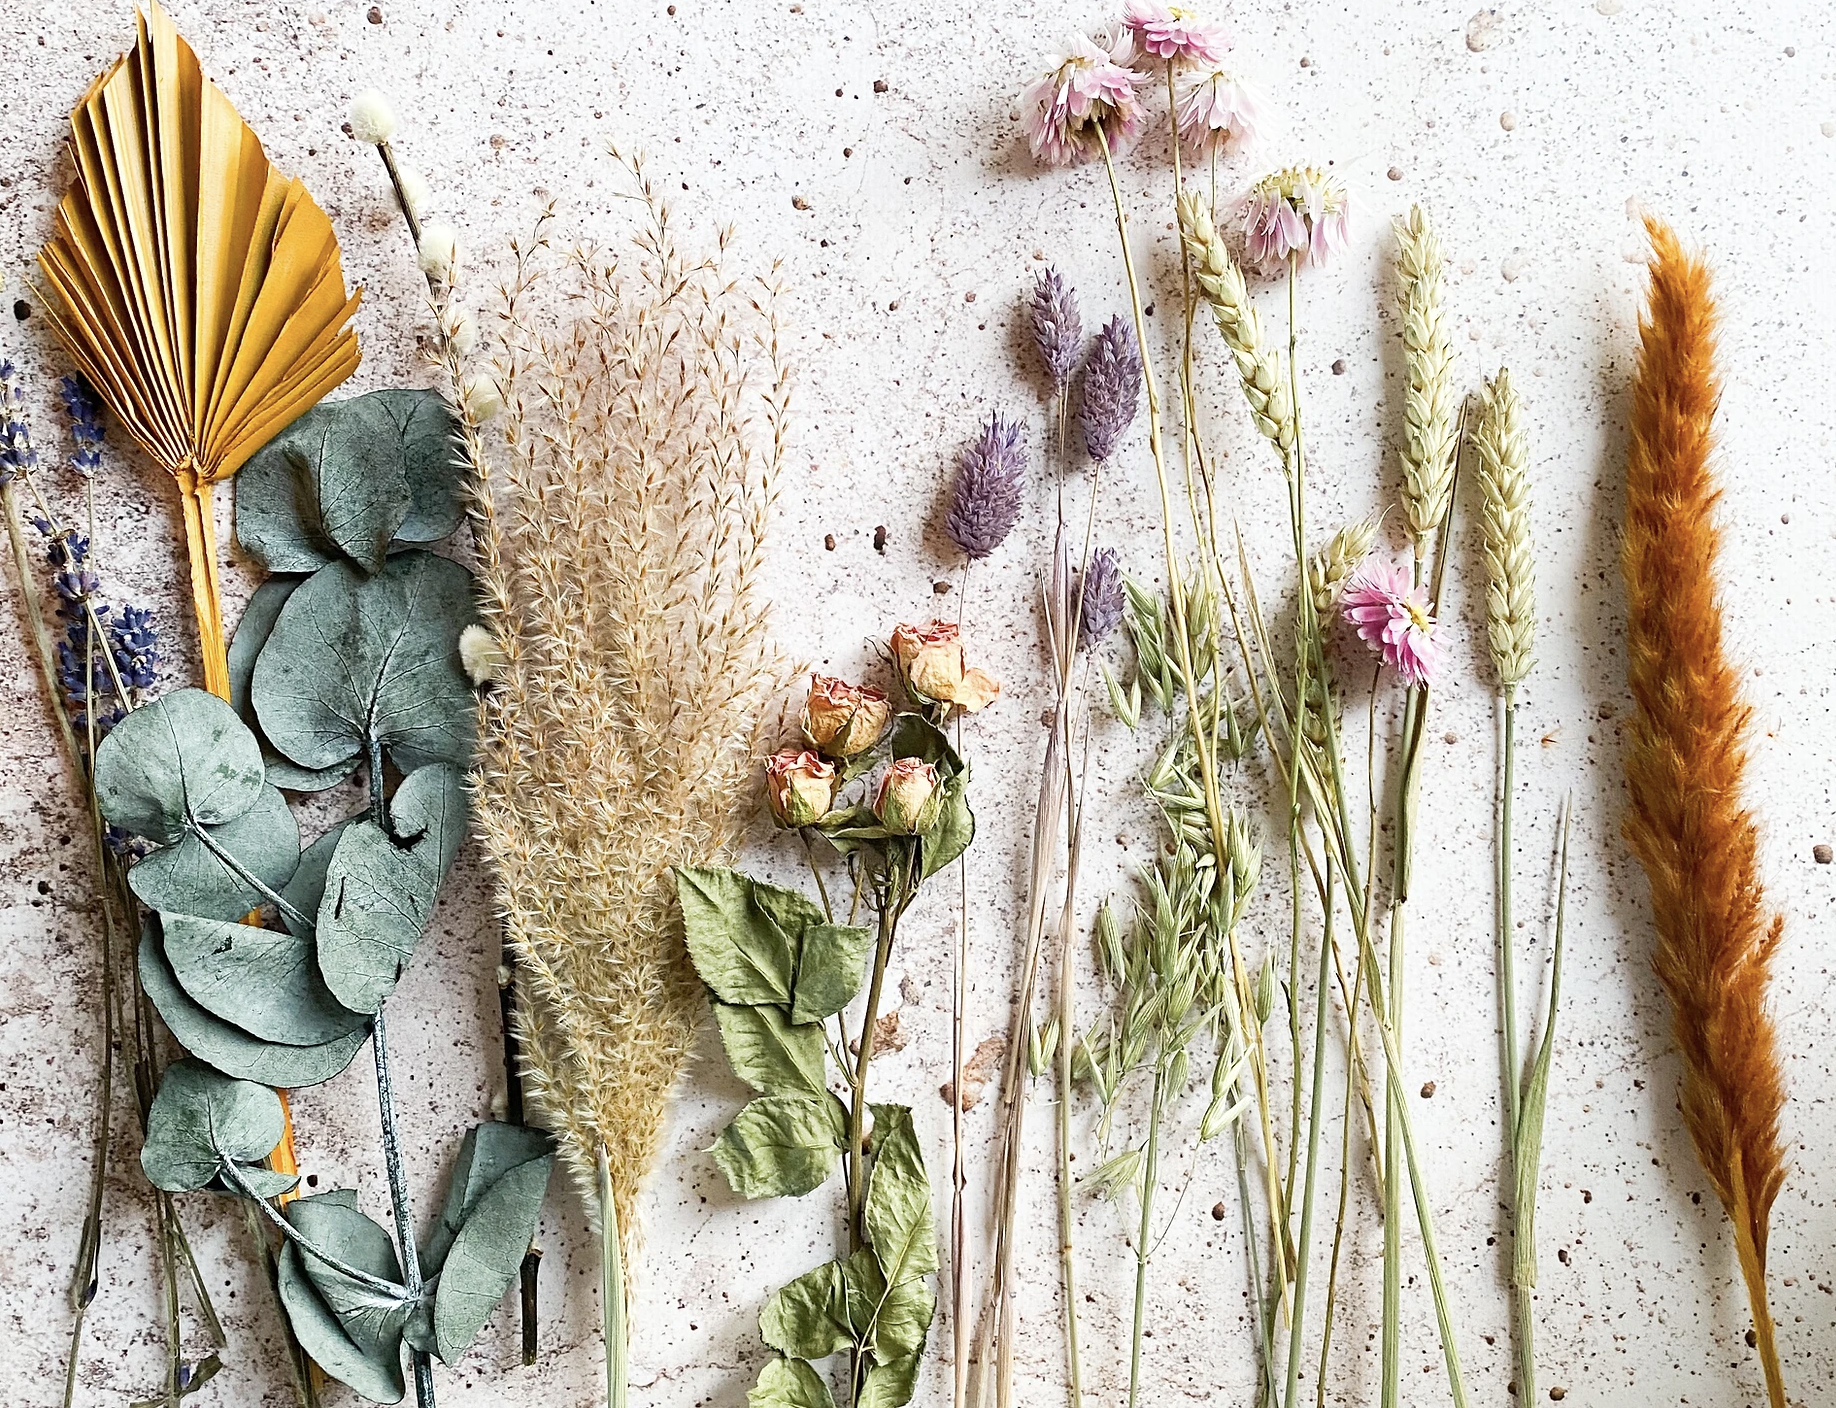 Dried flowers against a plain background.